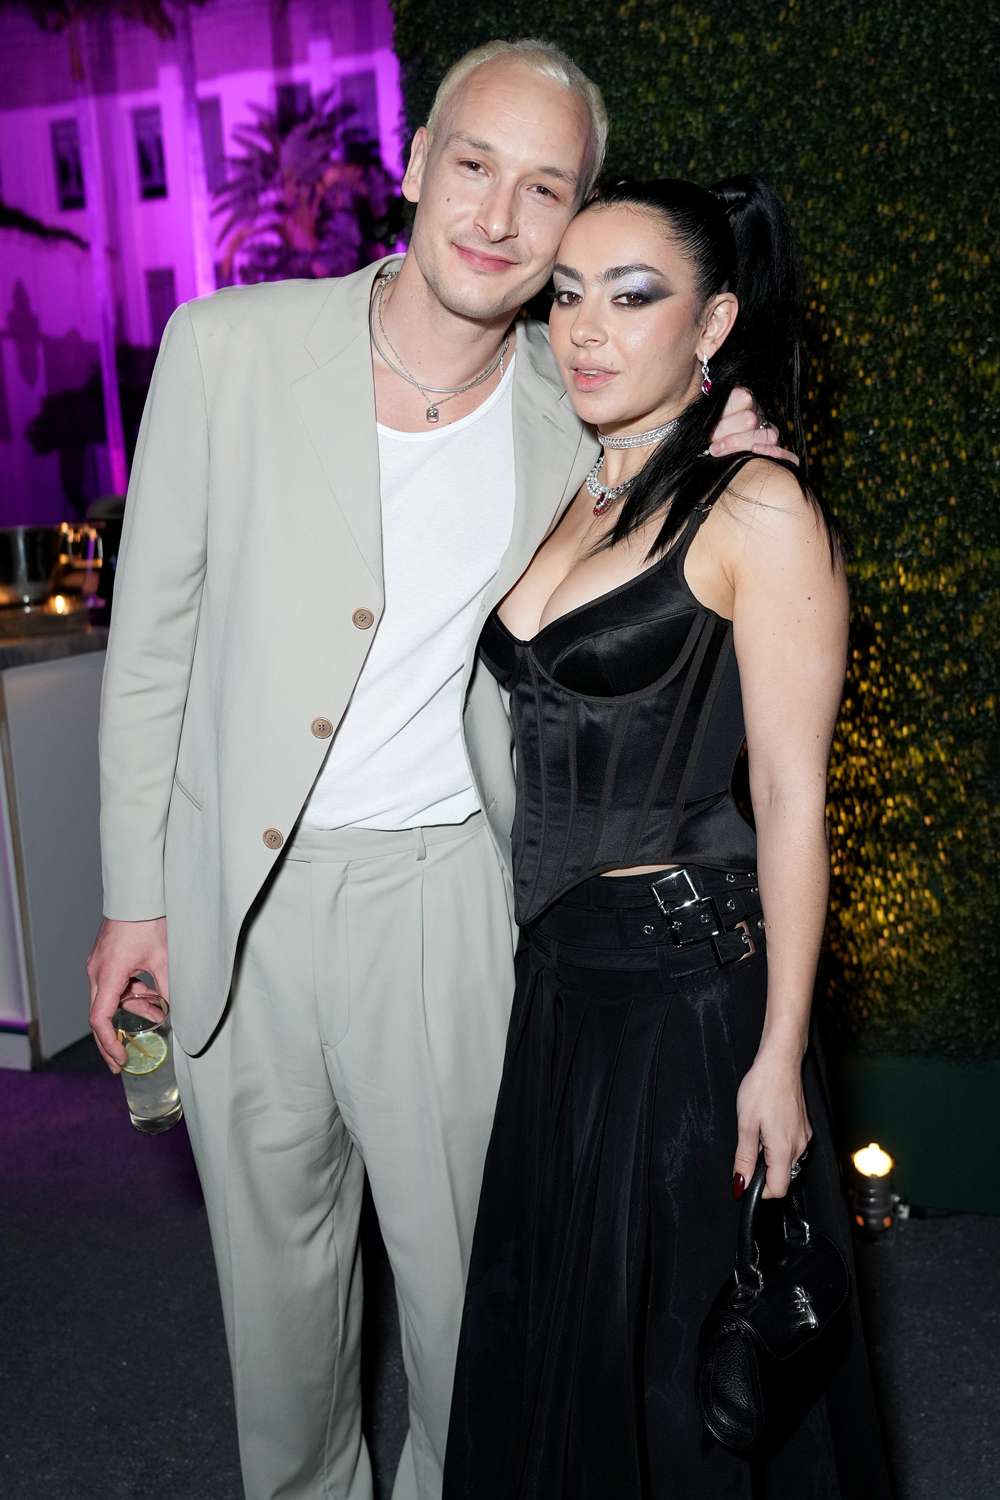 George Daniel and Charli XCX attend the 2023 Vanity Fair Oscar Party Hosted By Radhika Jones at Wallis Annenberg Center for the Performing Arts on March 12, 2023